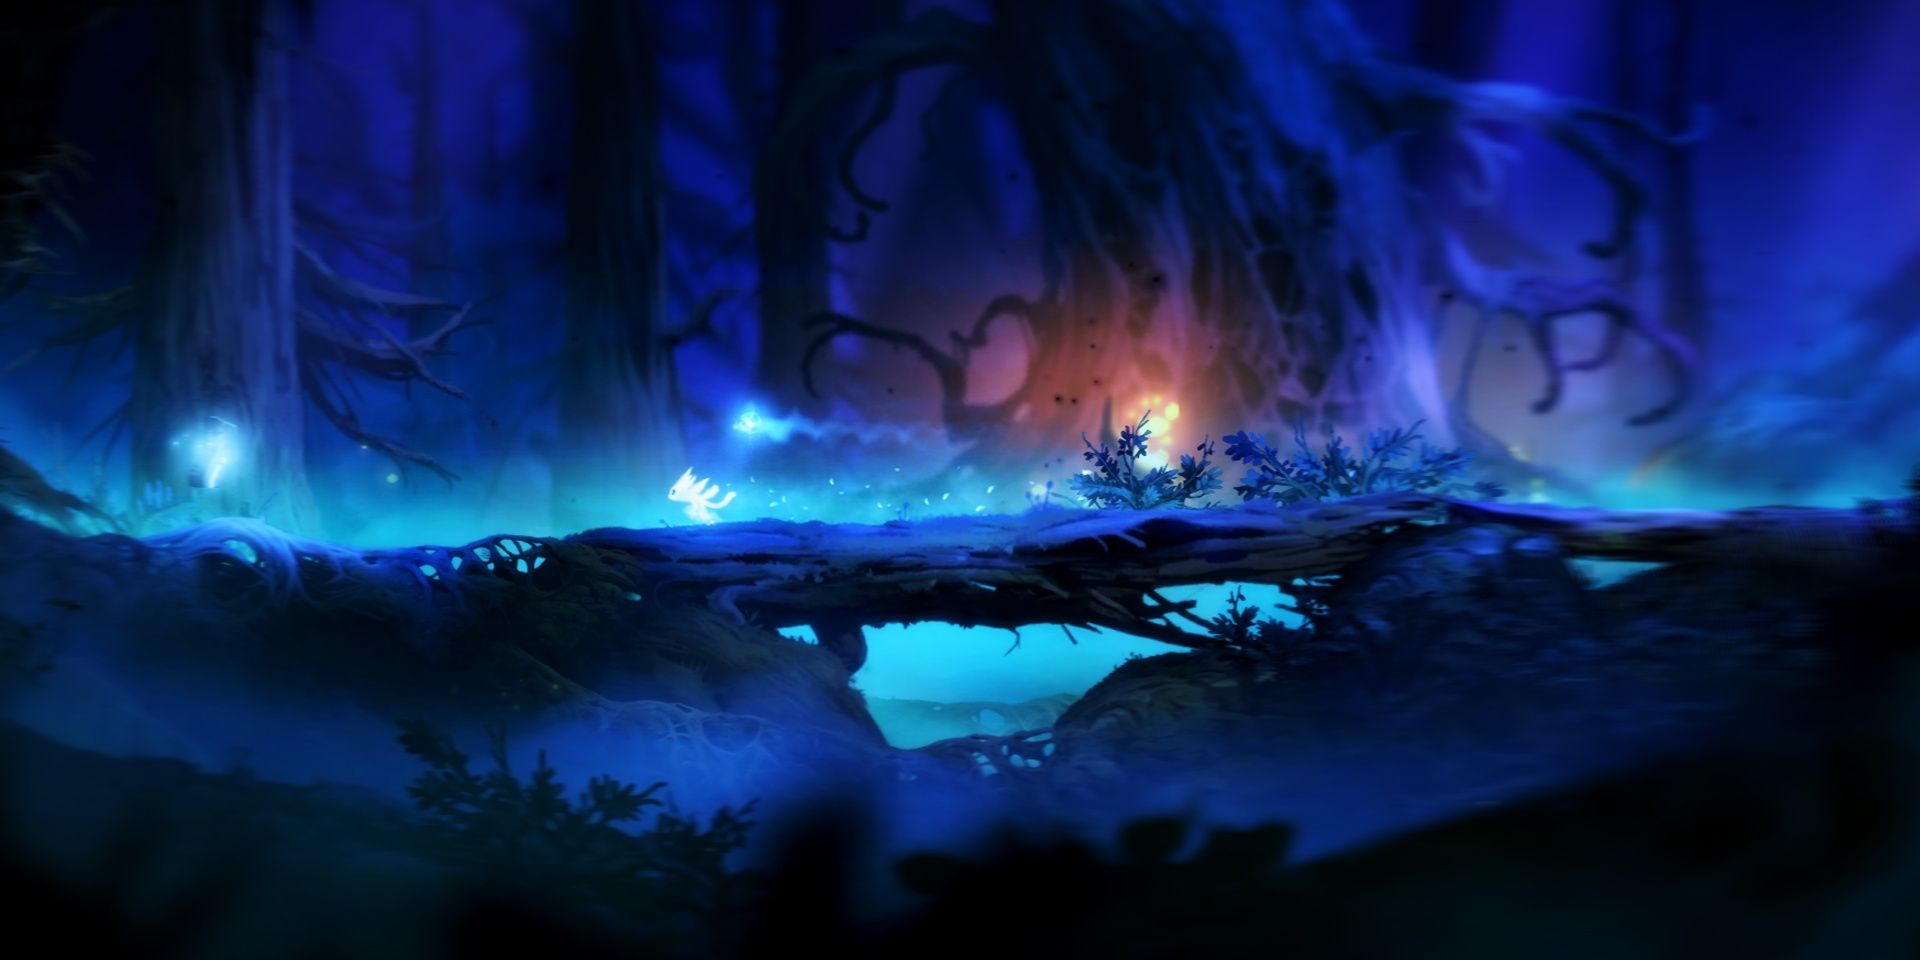 Ori sprinting across a log and Sein floating behind them in Ori and the Blind Forest